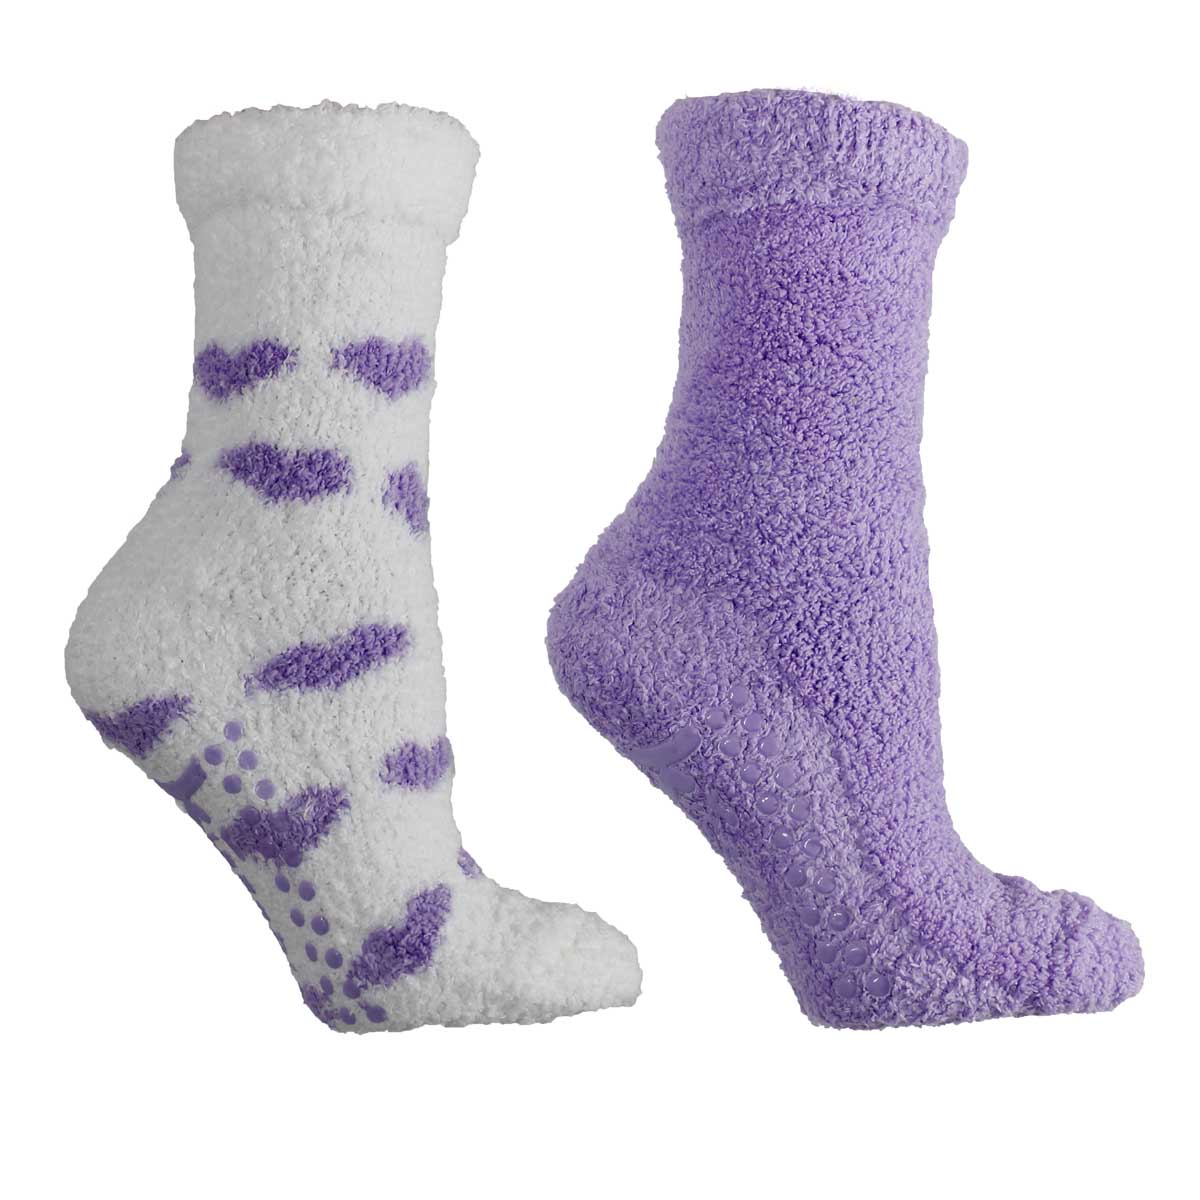 Women's Lavender Infused Slipper Socks, 2-Pair Pack with Lavender Sachet, "Hearts", Aromasoles by MinxNY